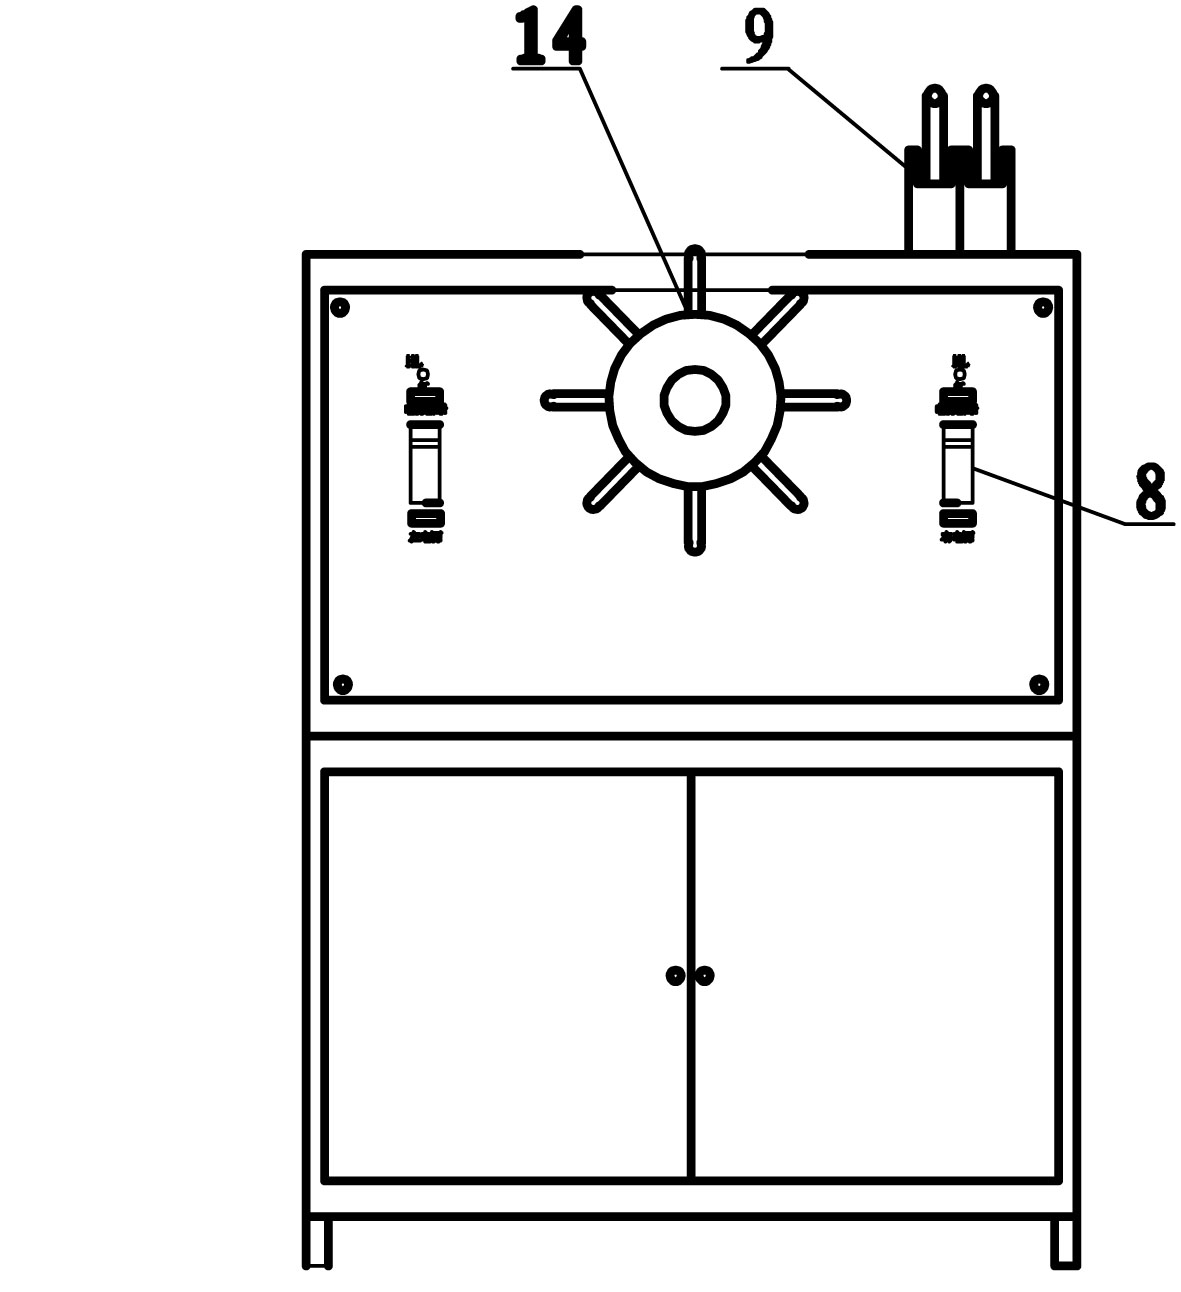 Propulsion device without gear box for vector control of permanent magnet synchronous motor of electric ship